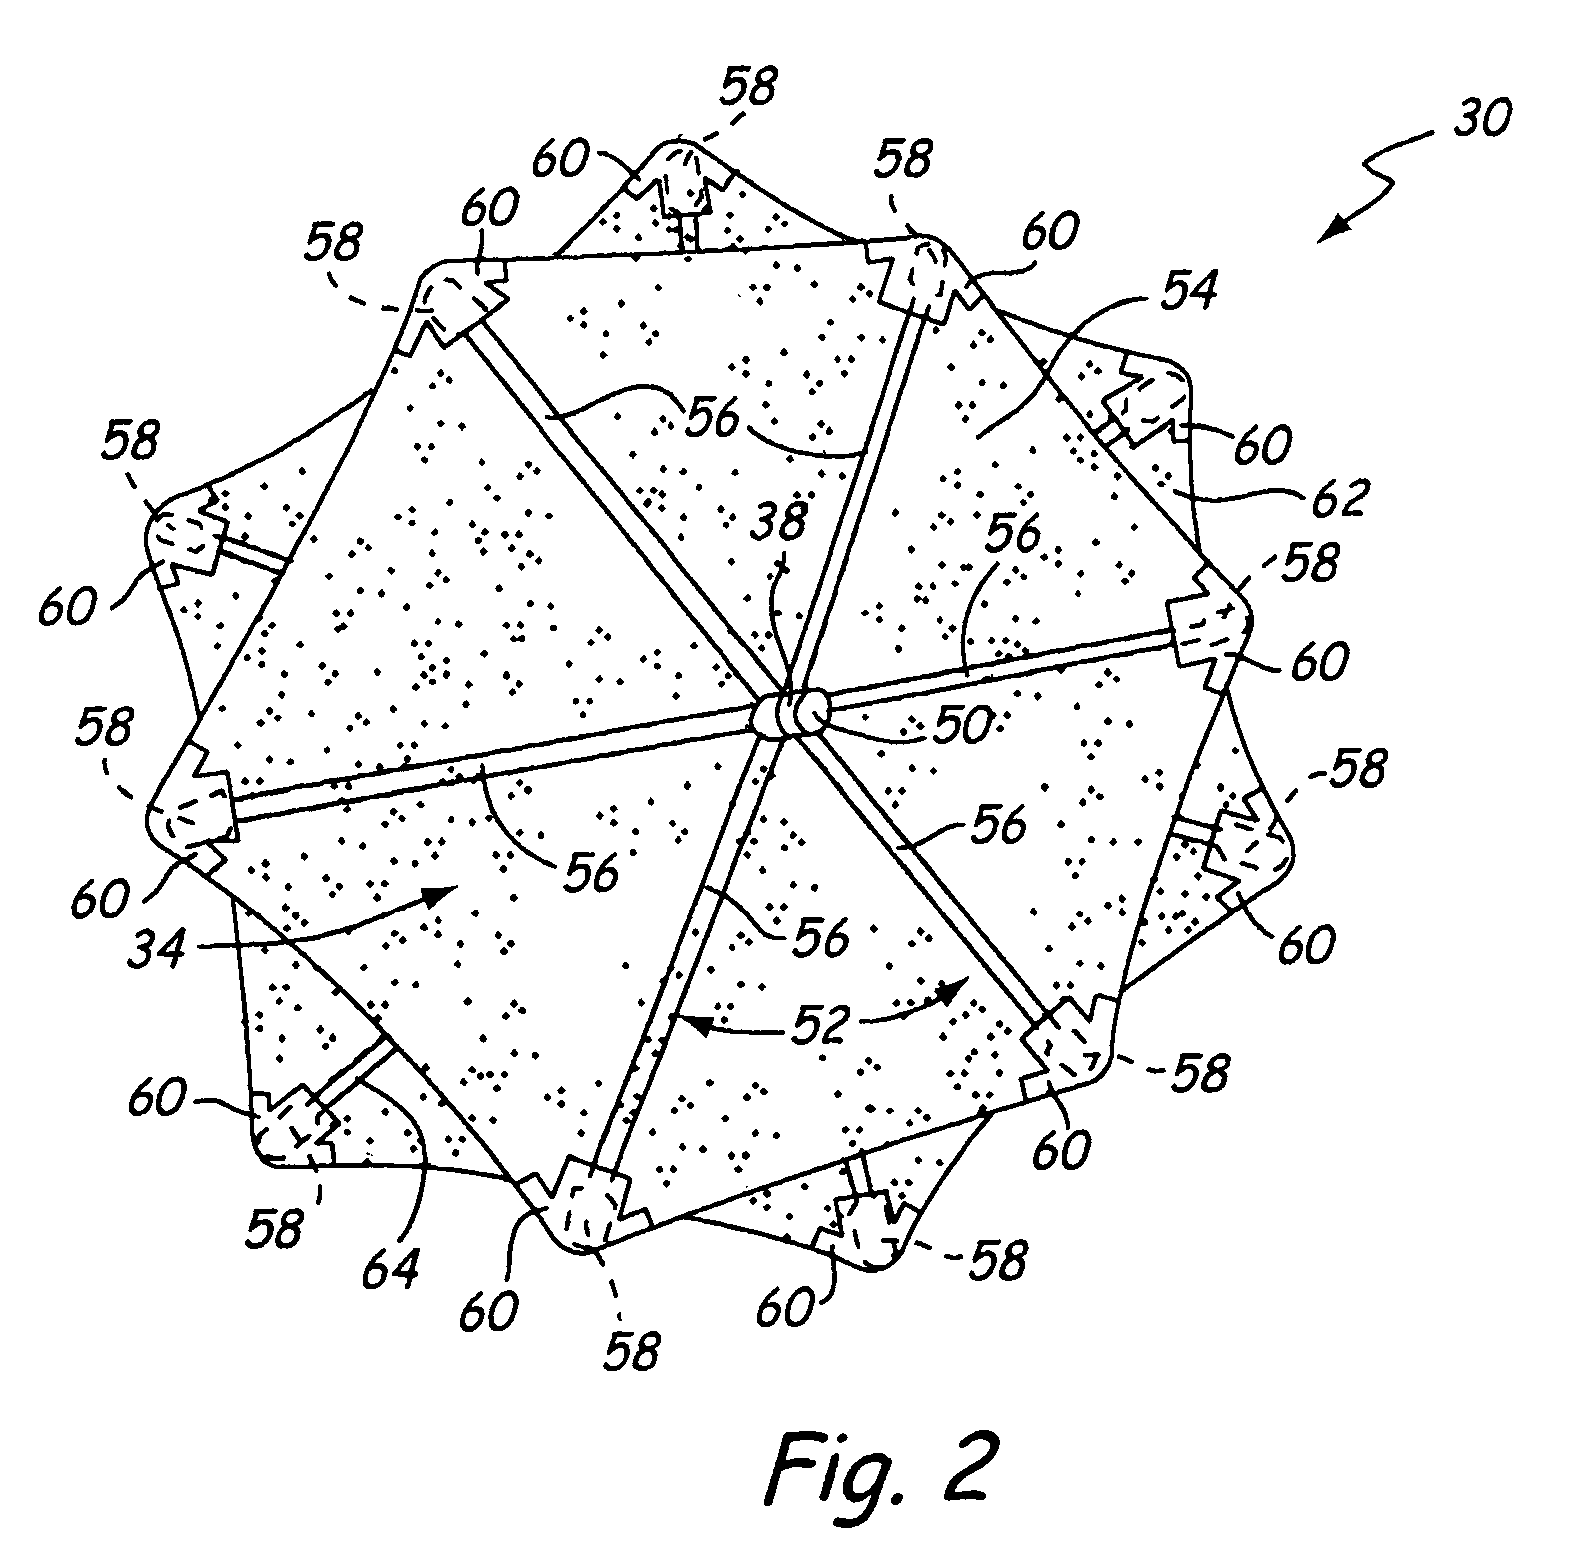 Self centering closure device for septal occlusion